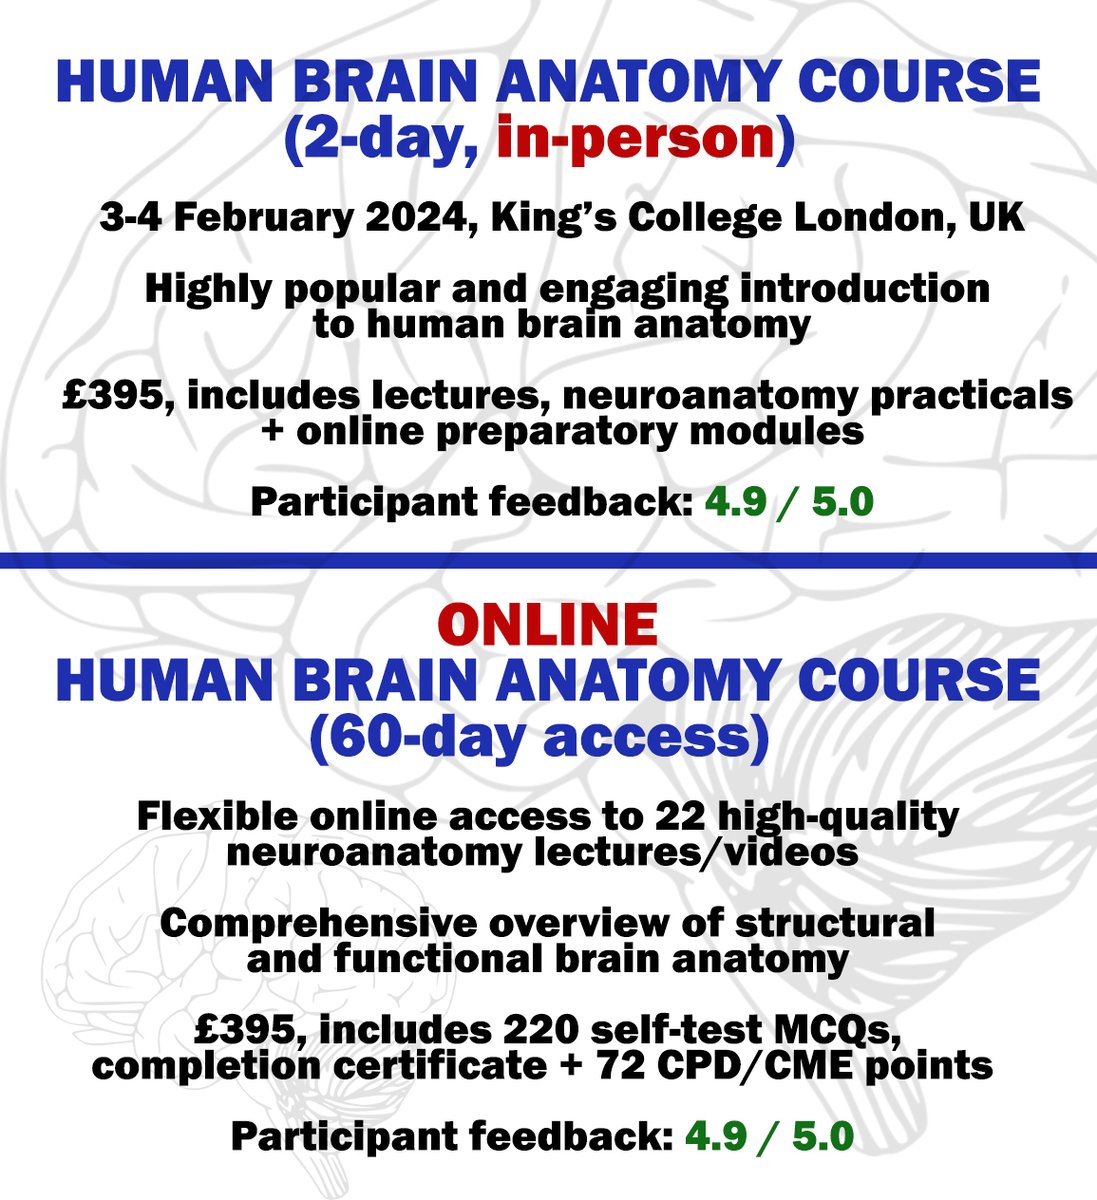 ONLINE HUMAN BRAIN ANATOMY COURSE (60-day access) ▶ More information / get instant access - neurocourses.com/online-course/… HUMAN BRAIN ANATOMY COURSE - in-person (2-day) ▶ More information / register now - neurocourses.com/attendance-cou…